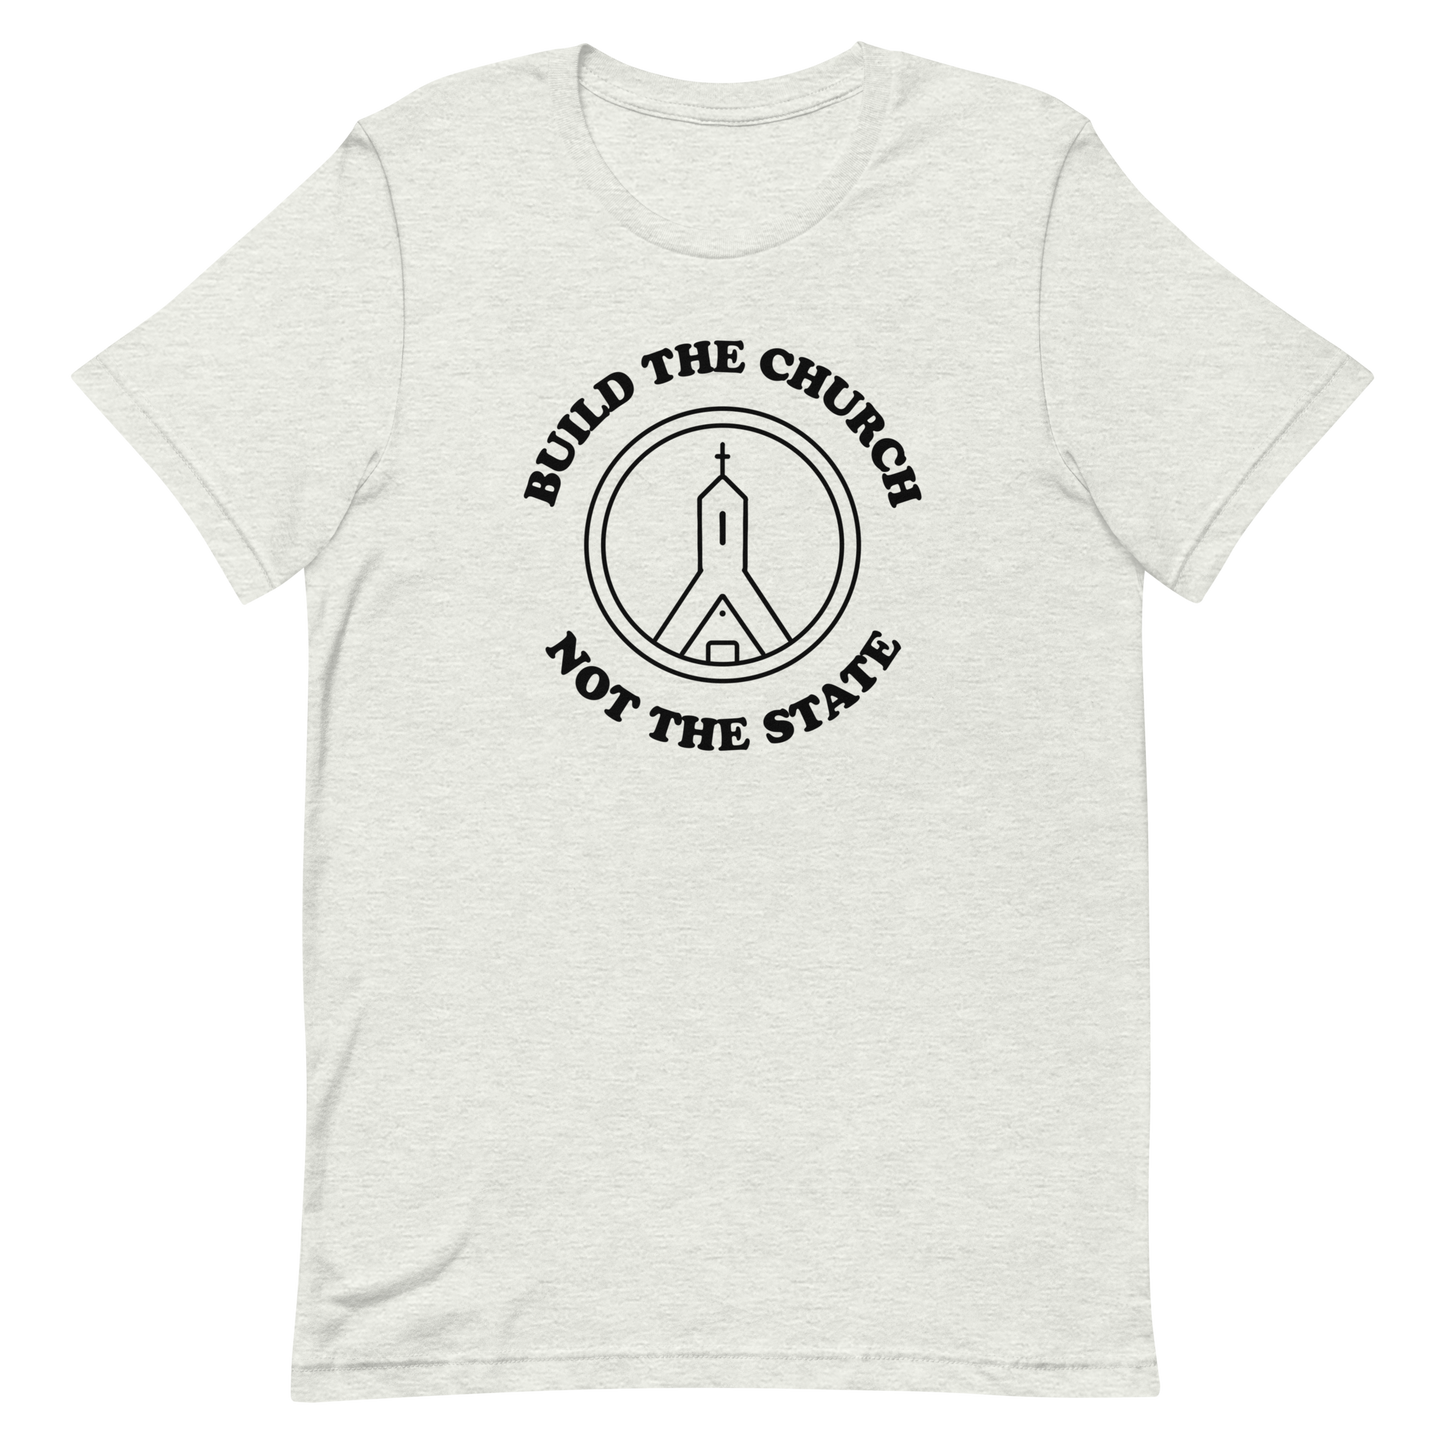 Build The Church Not The State T-shirt